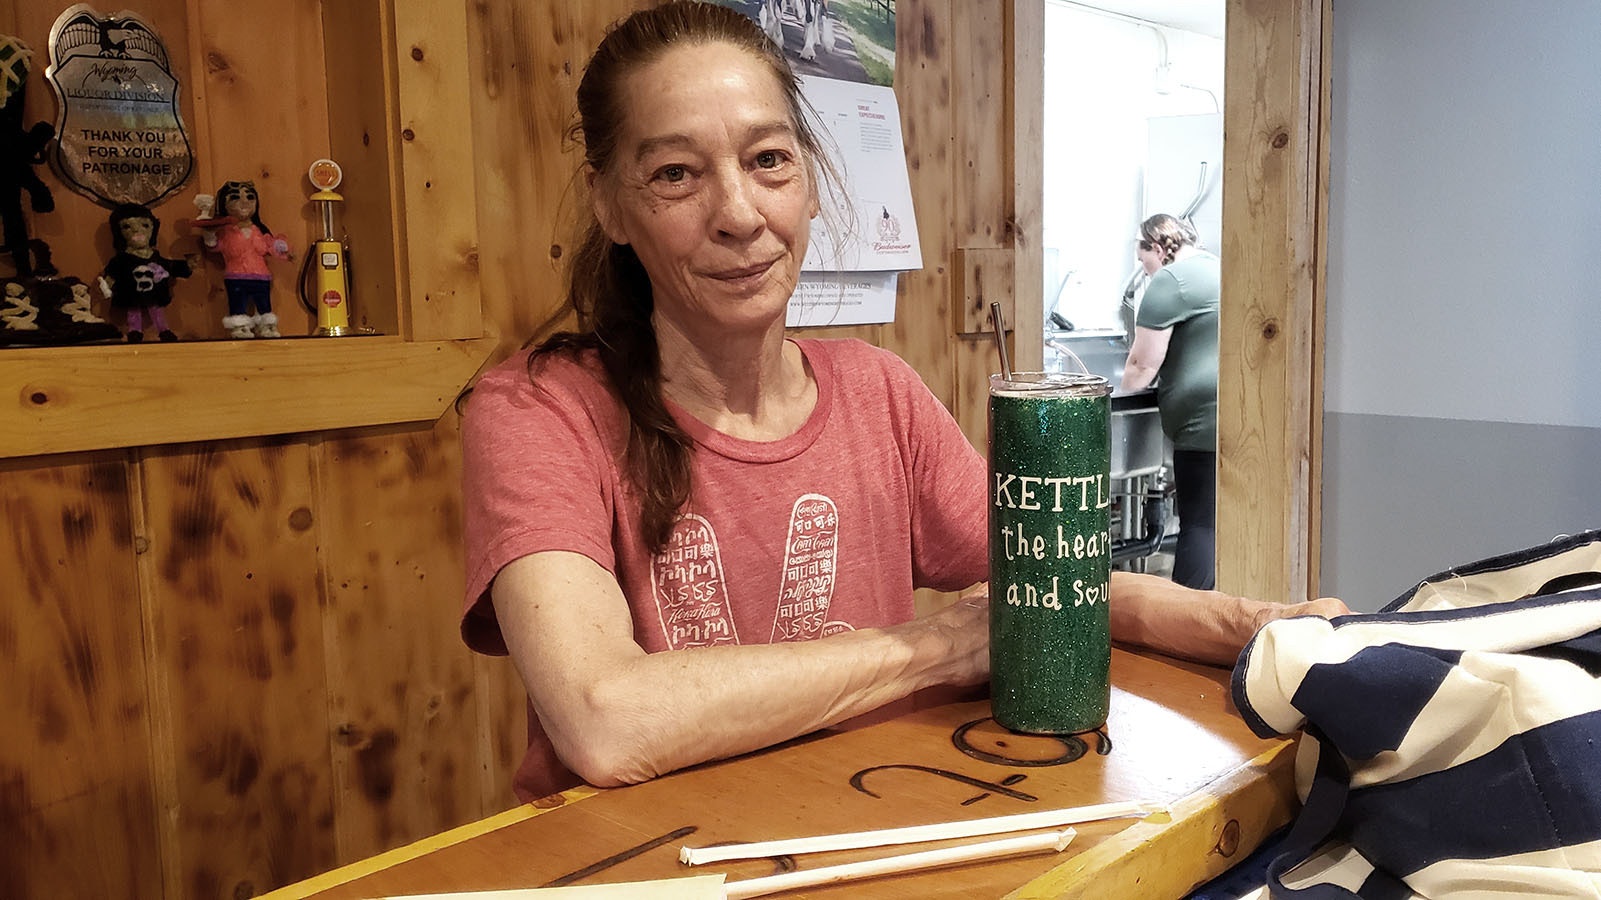 Sheila Wright, co-owner of the Kemmerer Kettle, said she's already seeing an uptick in trailer rentals even though construction of a proposed nuclear plant in Kemmerer hasn't yet started.